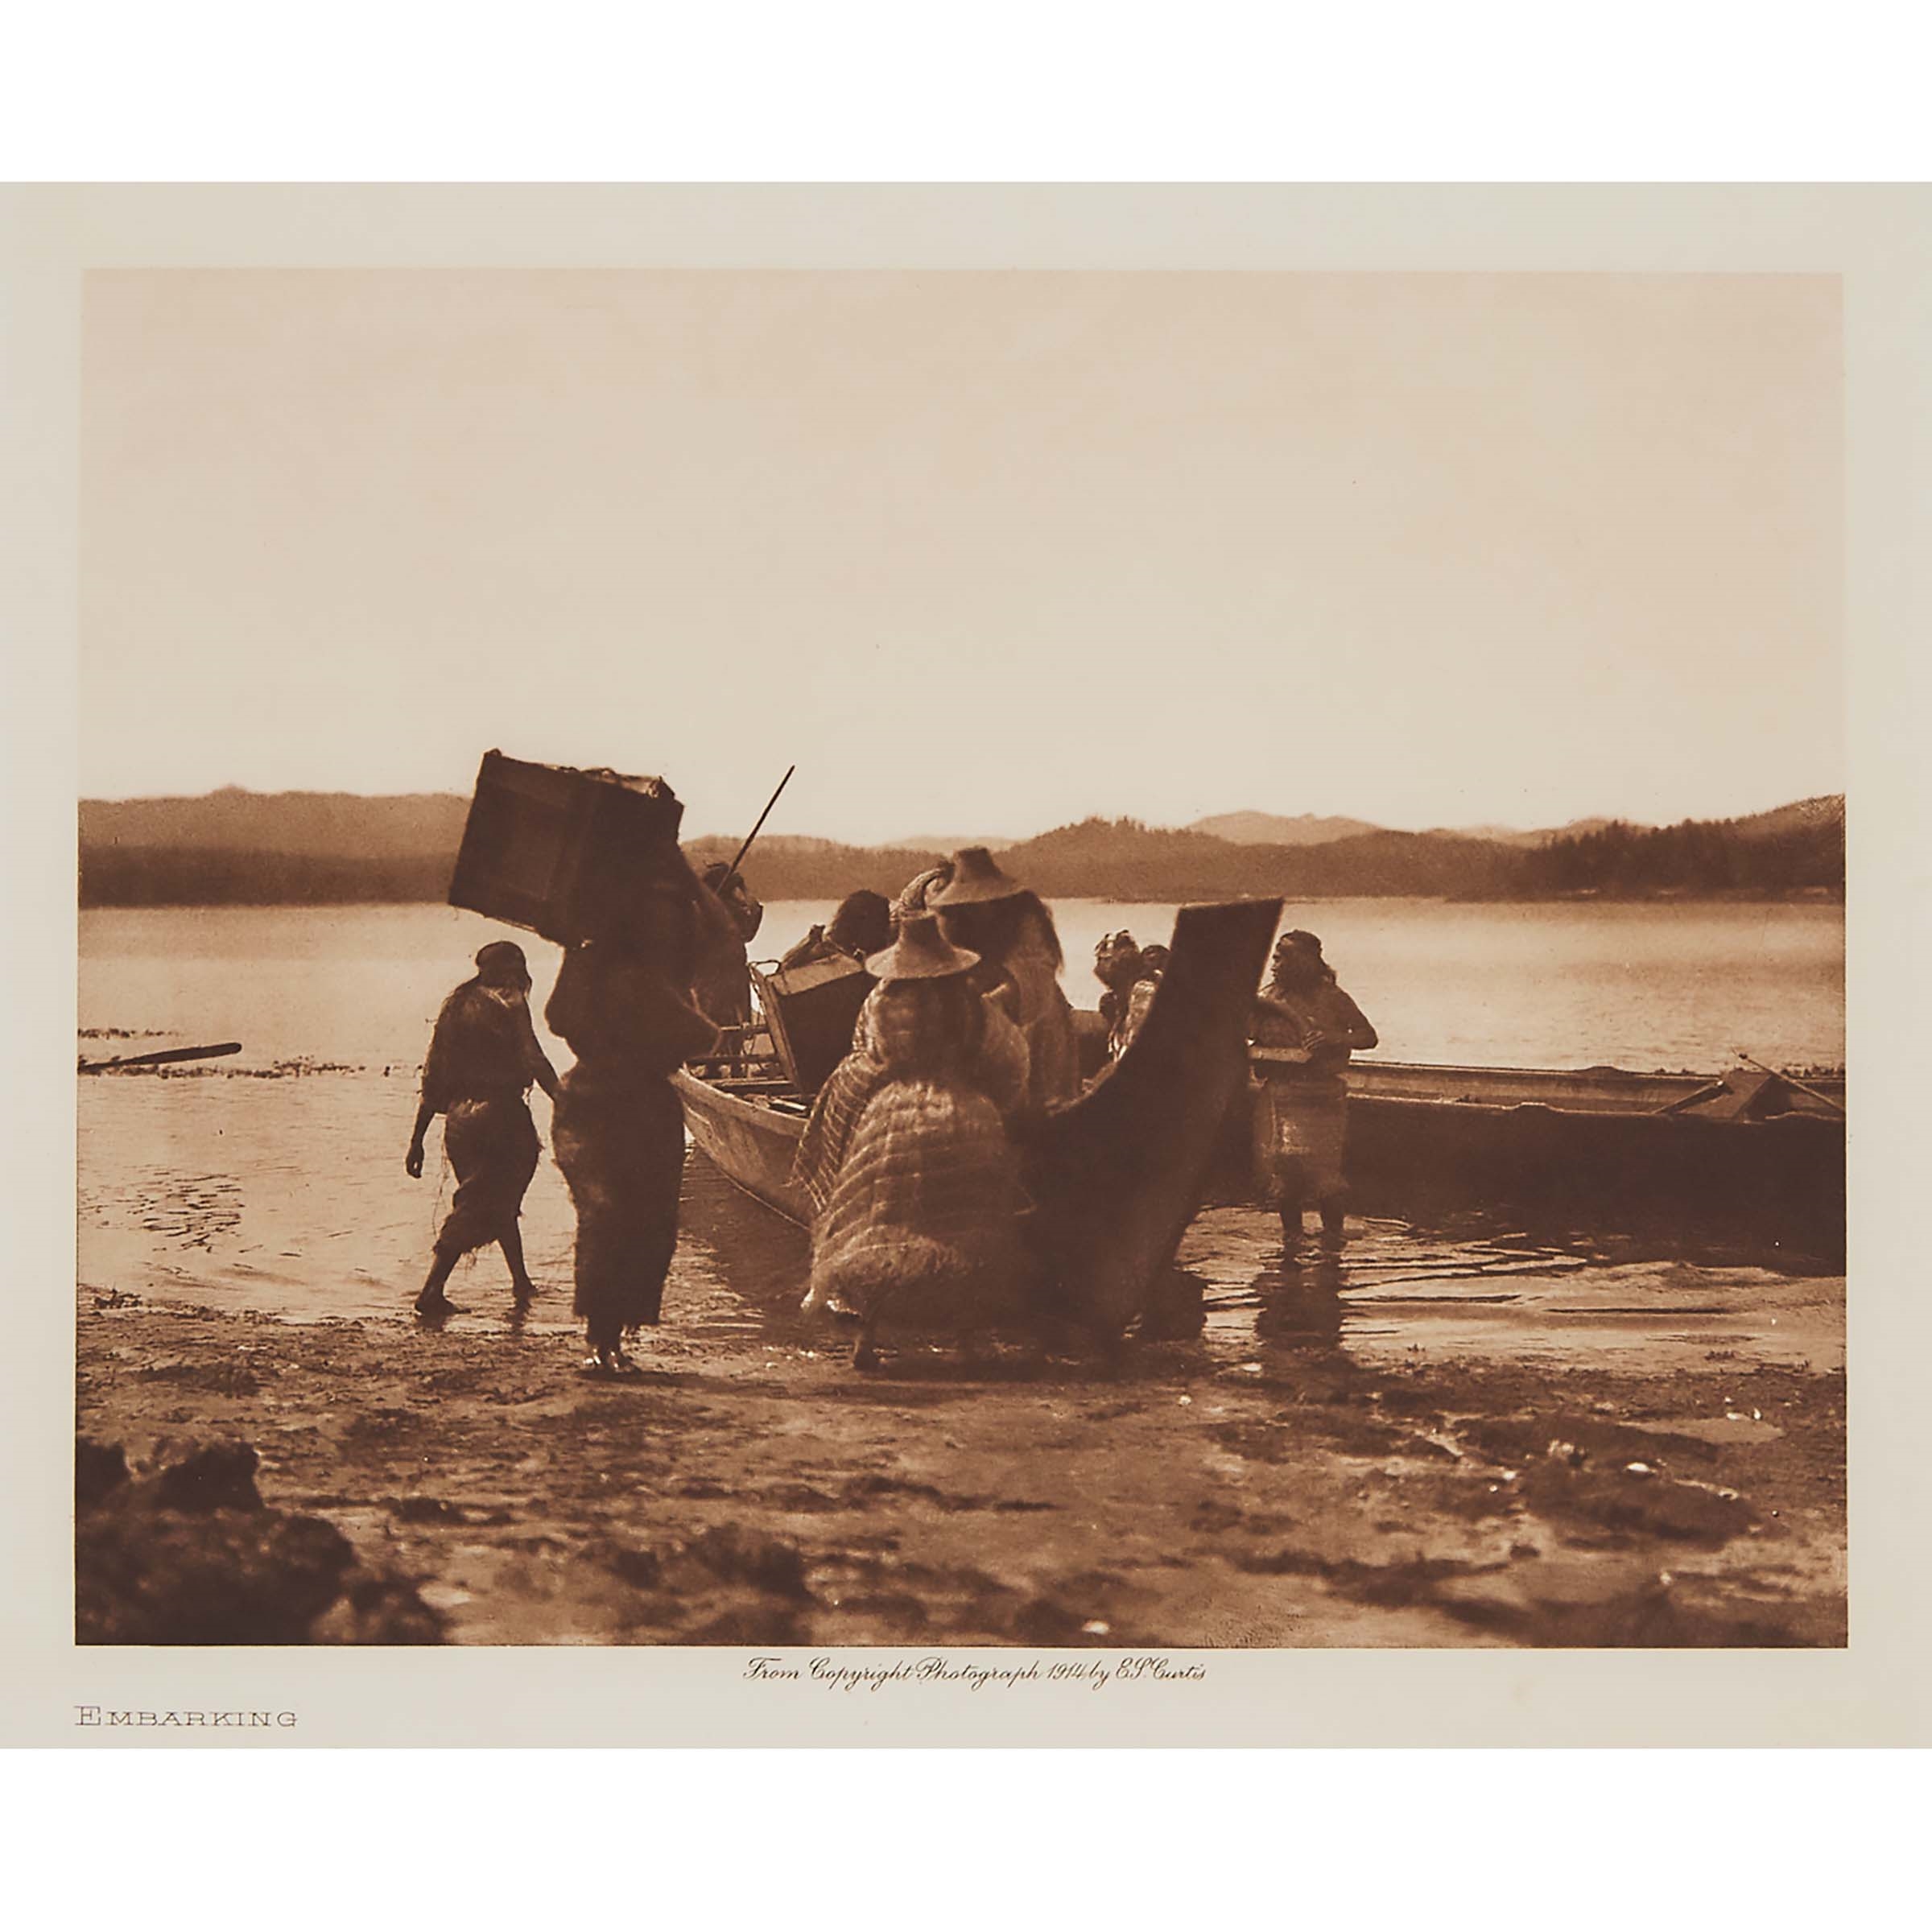 EMBARKING (FROM "THE NORTH AMERICAN INDIAN," VOLUME 10) by Edward S. Curtis, 1914